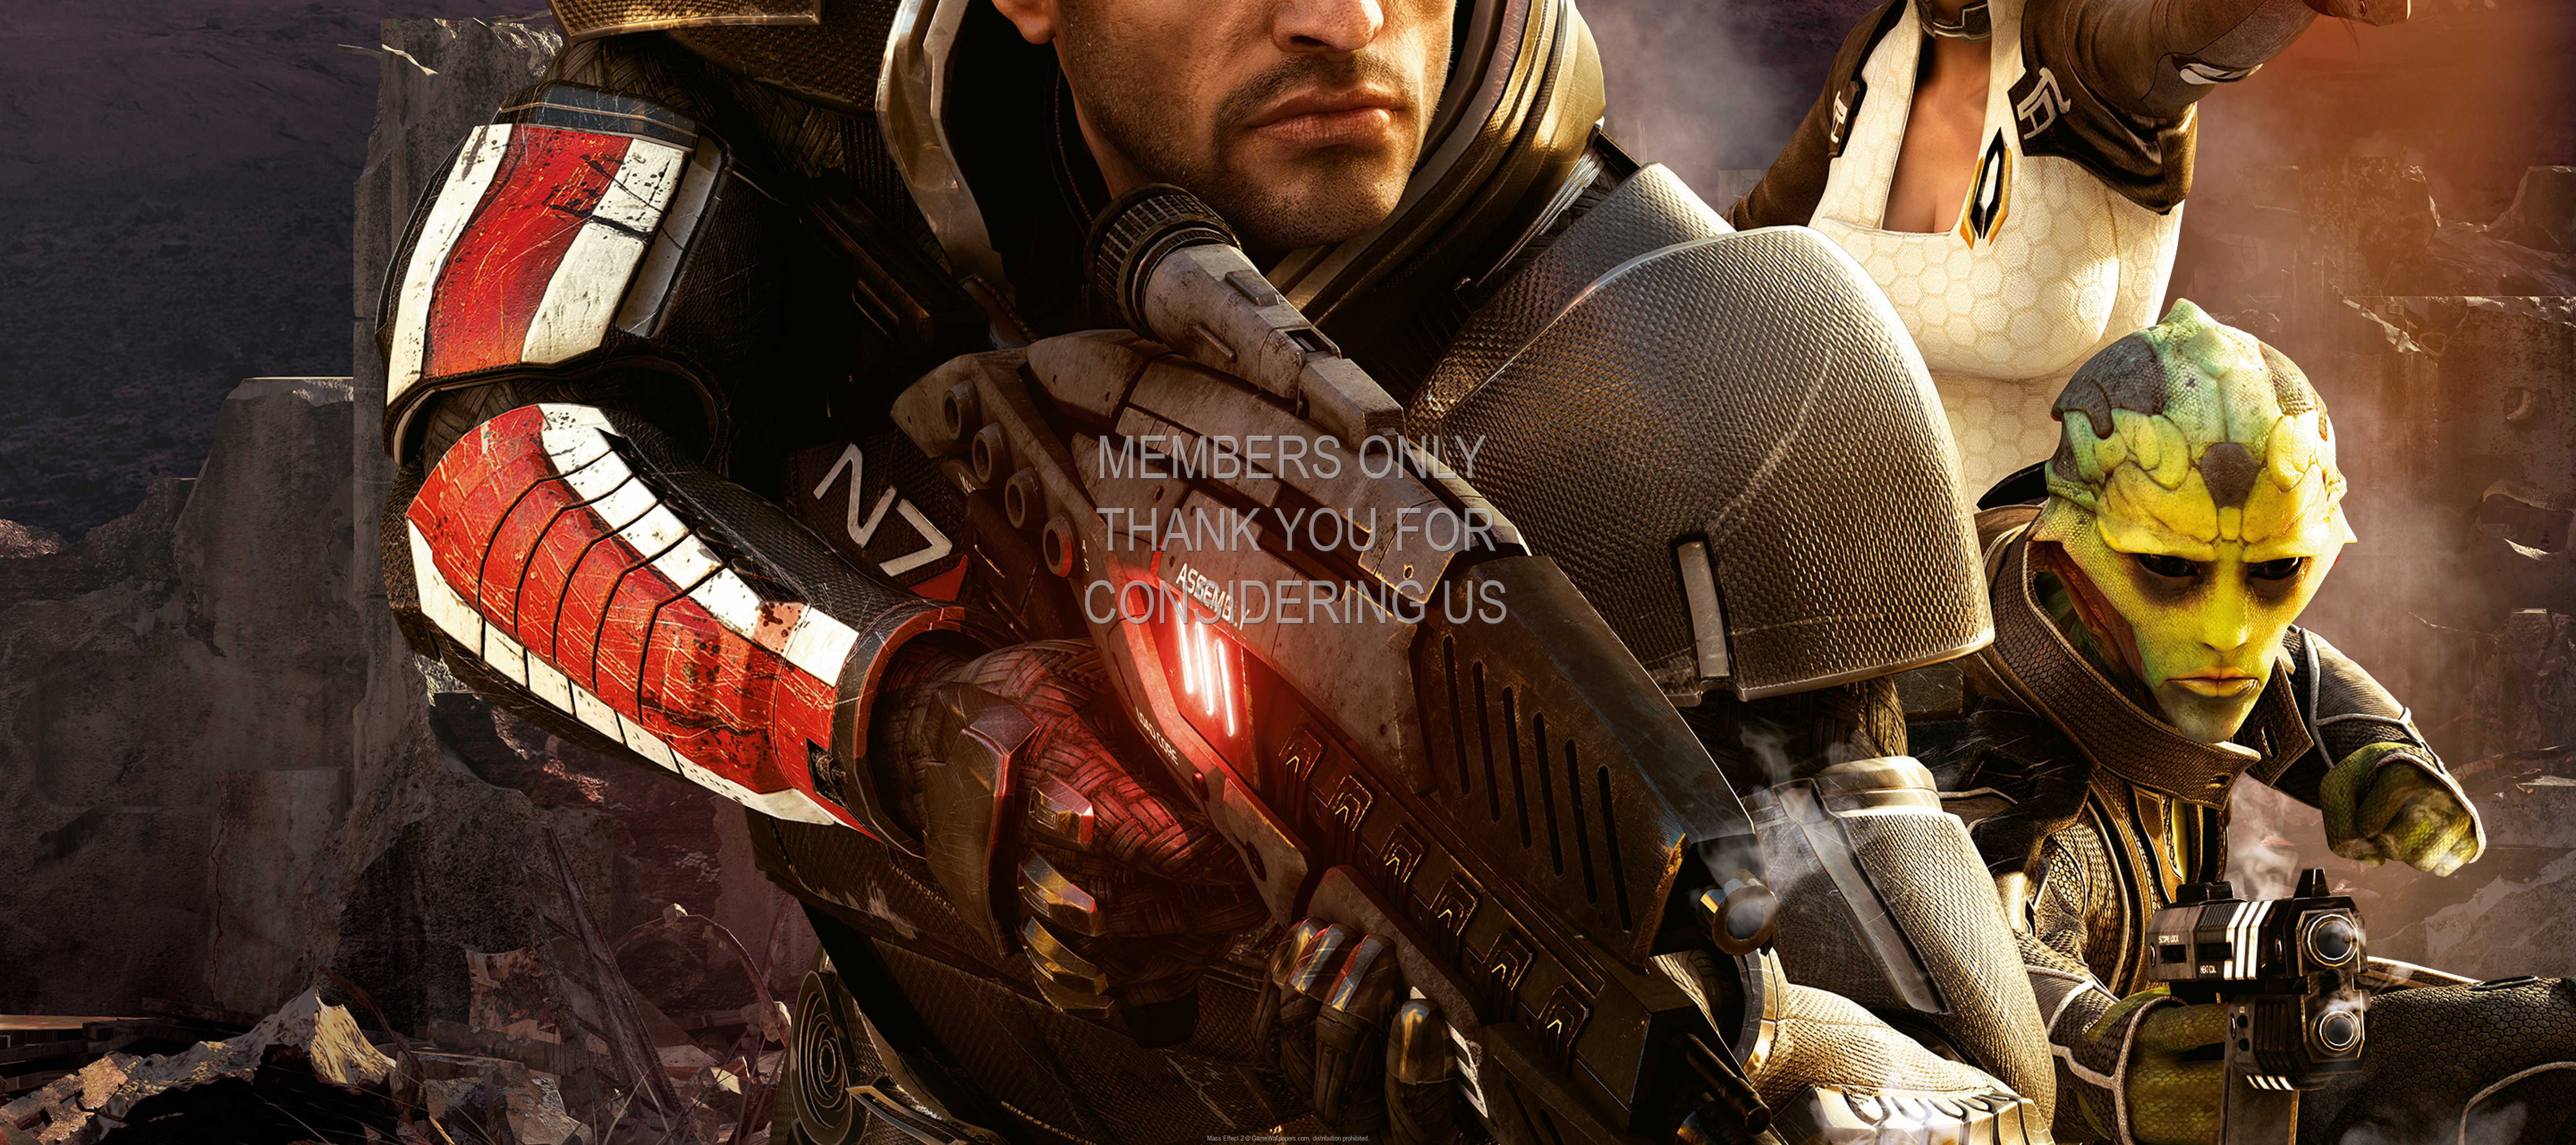 Mass Effect 2 1440p%20Horizontal Mobile wallpaper or background 08